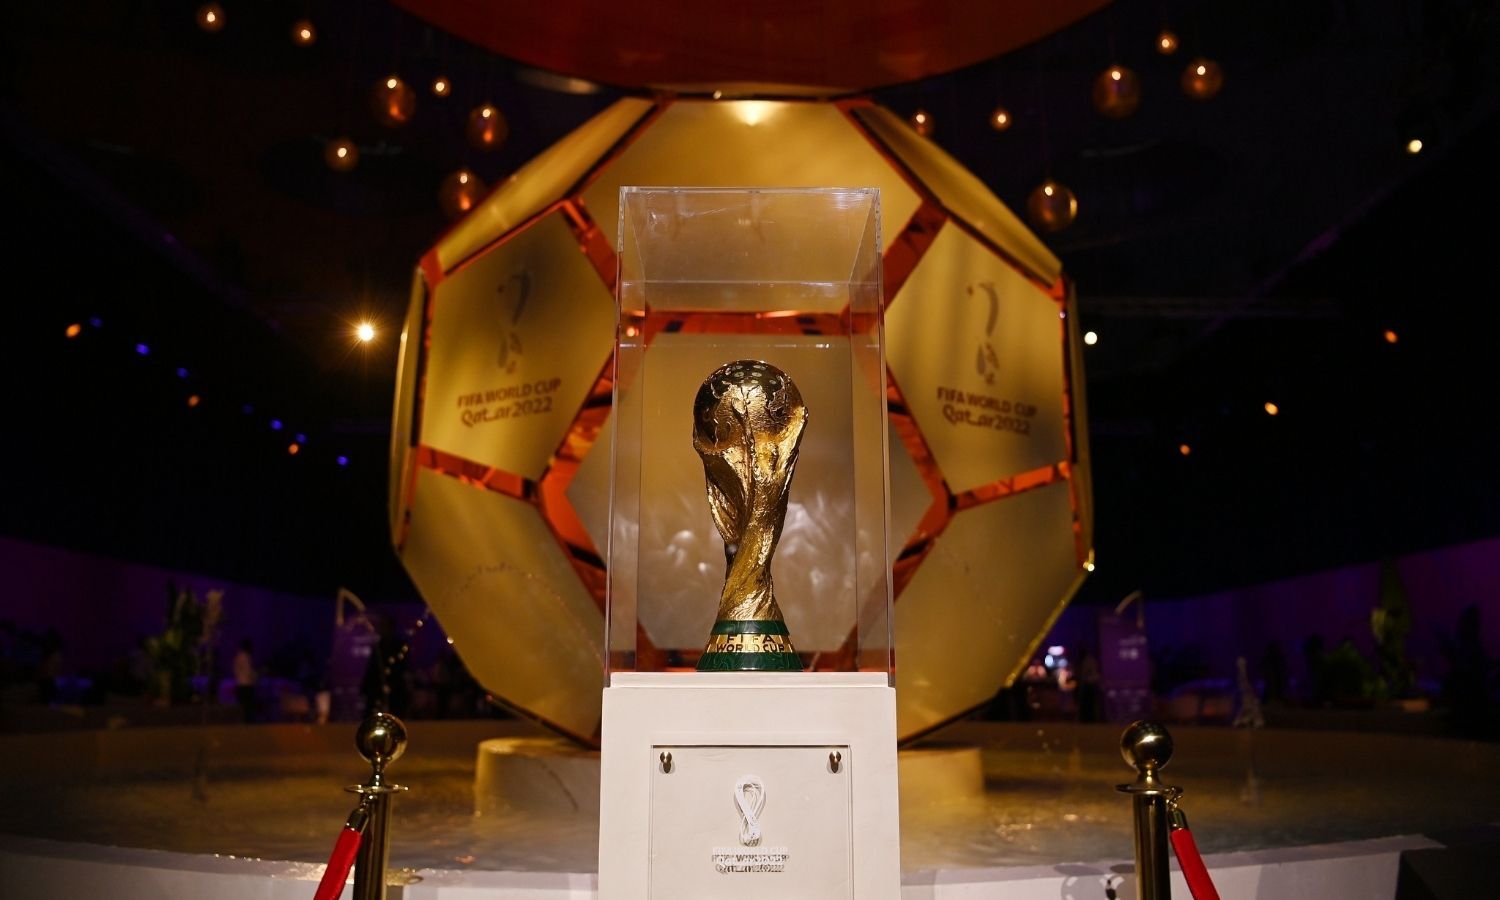 FIFA World Cup Qatar 2022: World Cup Group Stage Pairings - News18